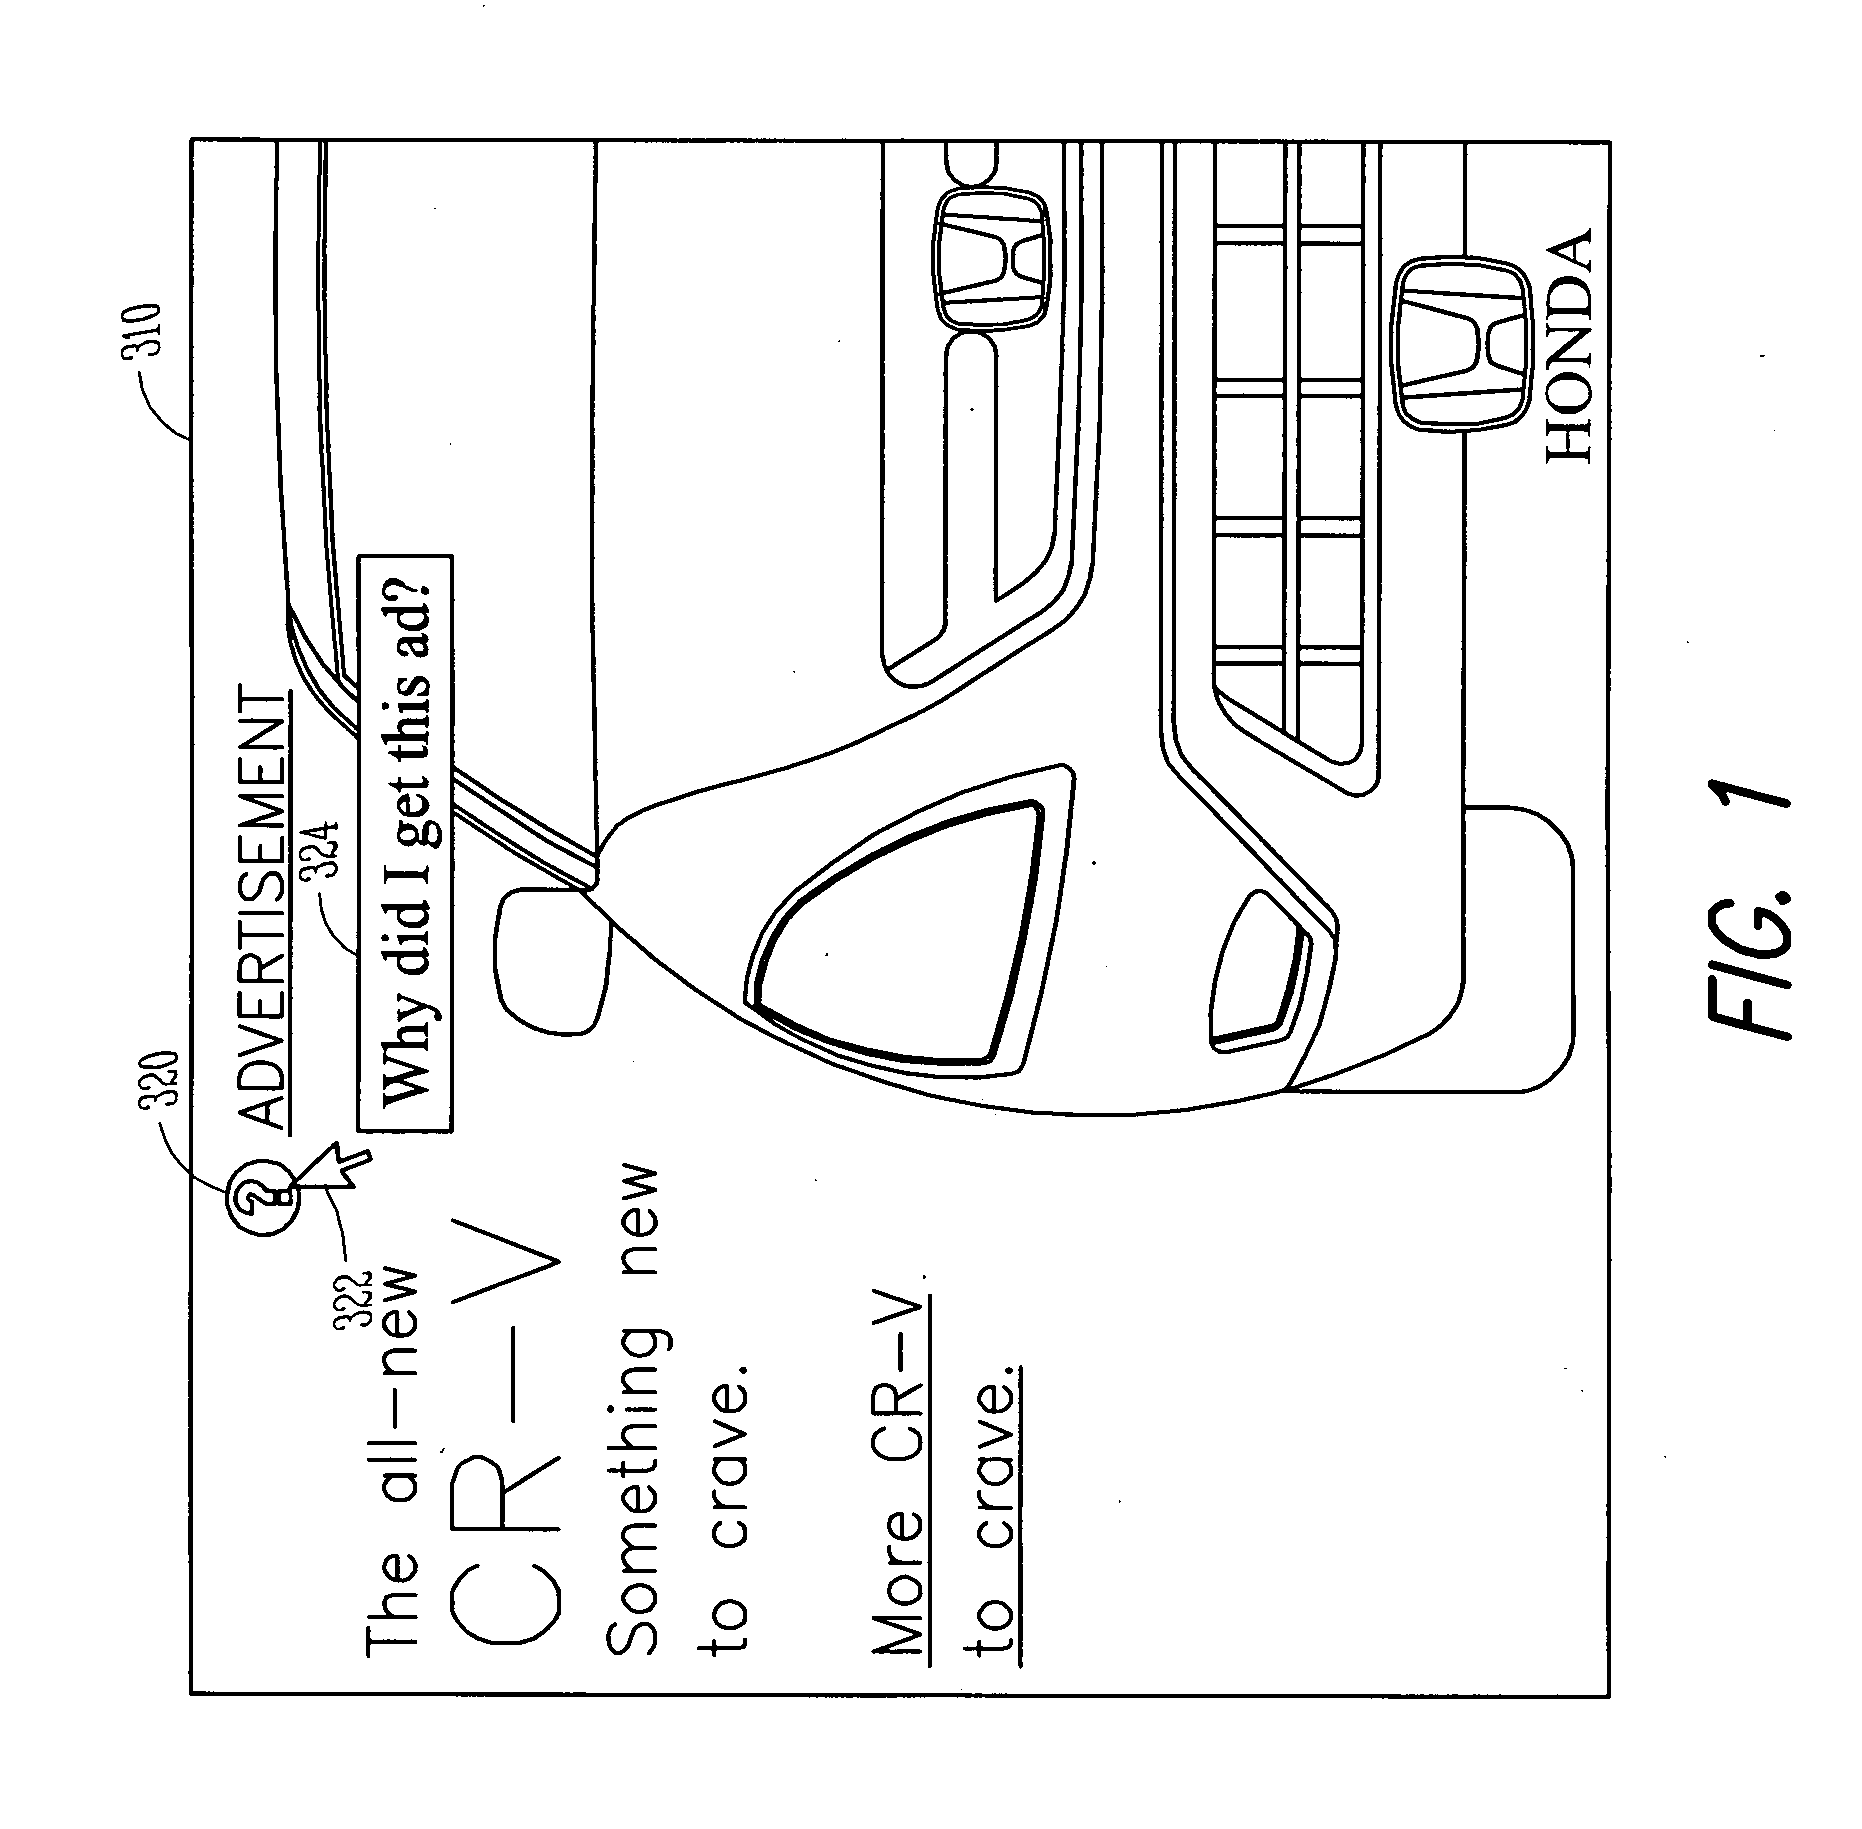 System and method for contextual advertising and merchandizing based on user configurable preferences